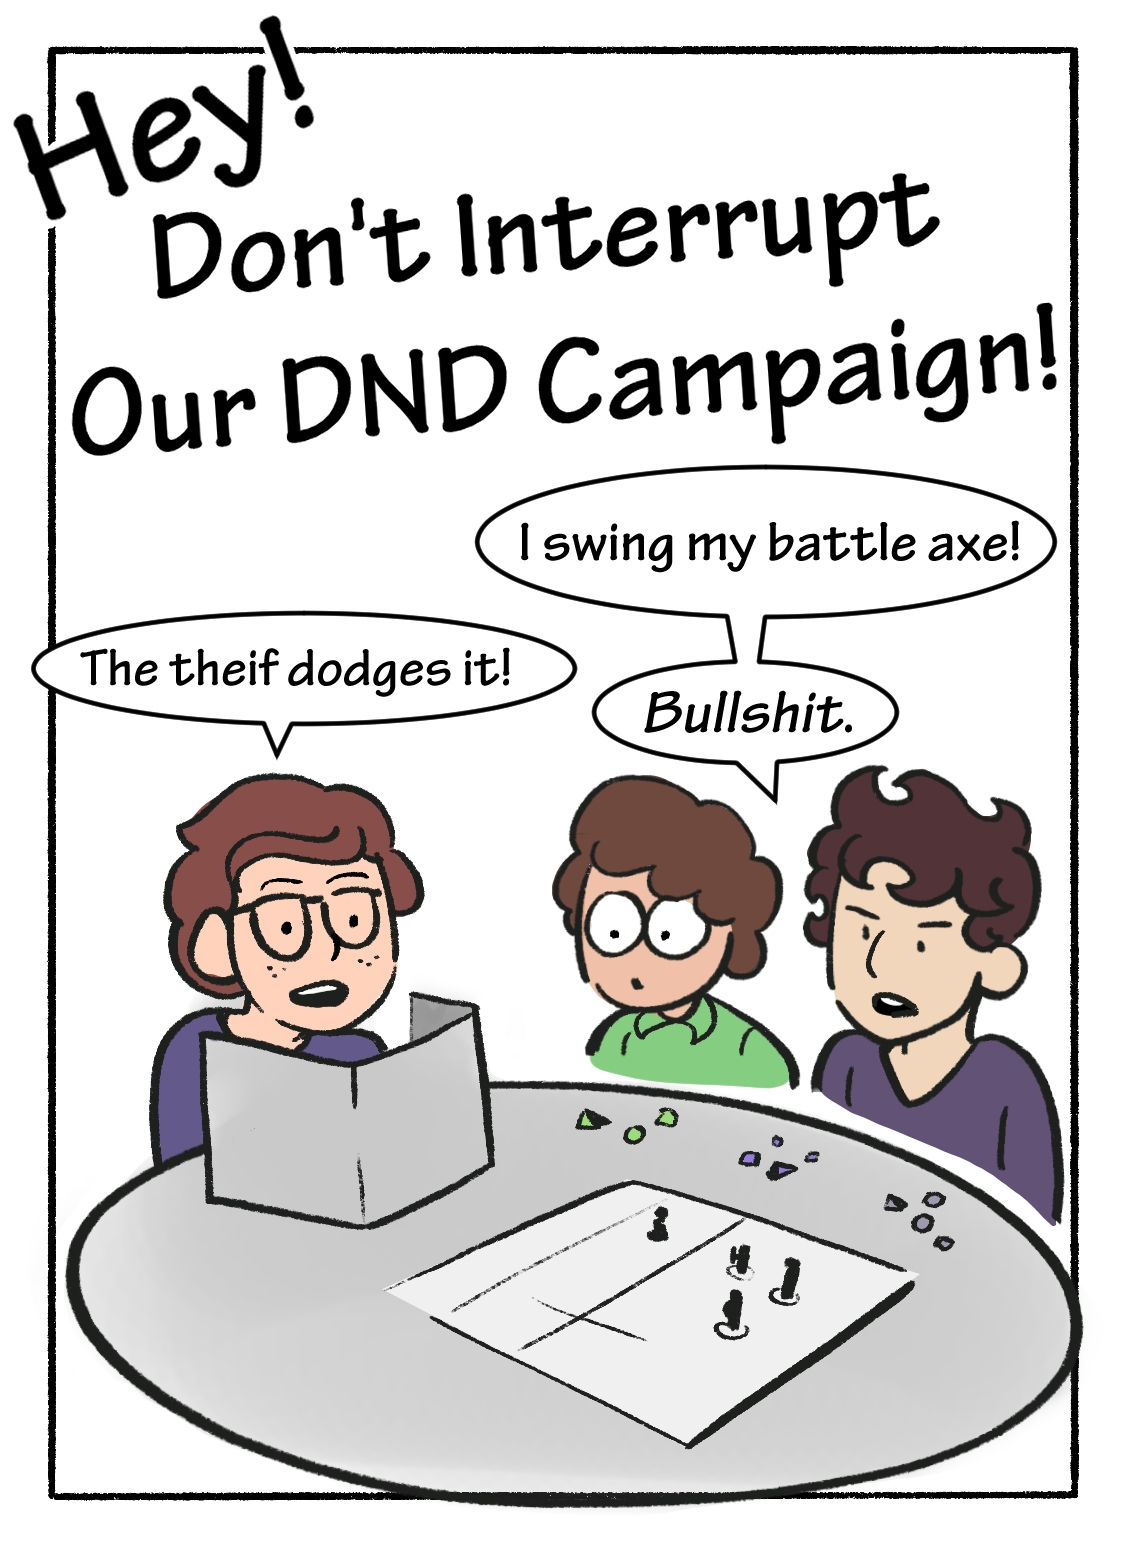 Hey! Don't Interrupt Our DND Campaign! 0